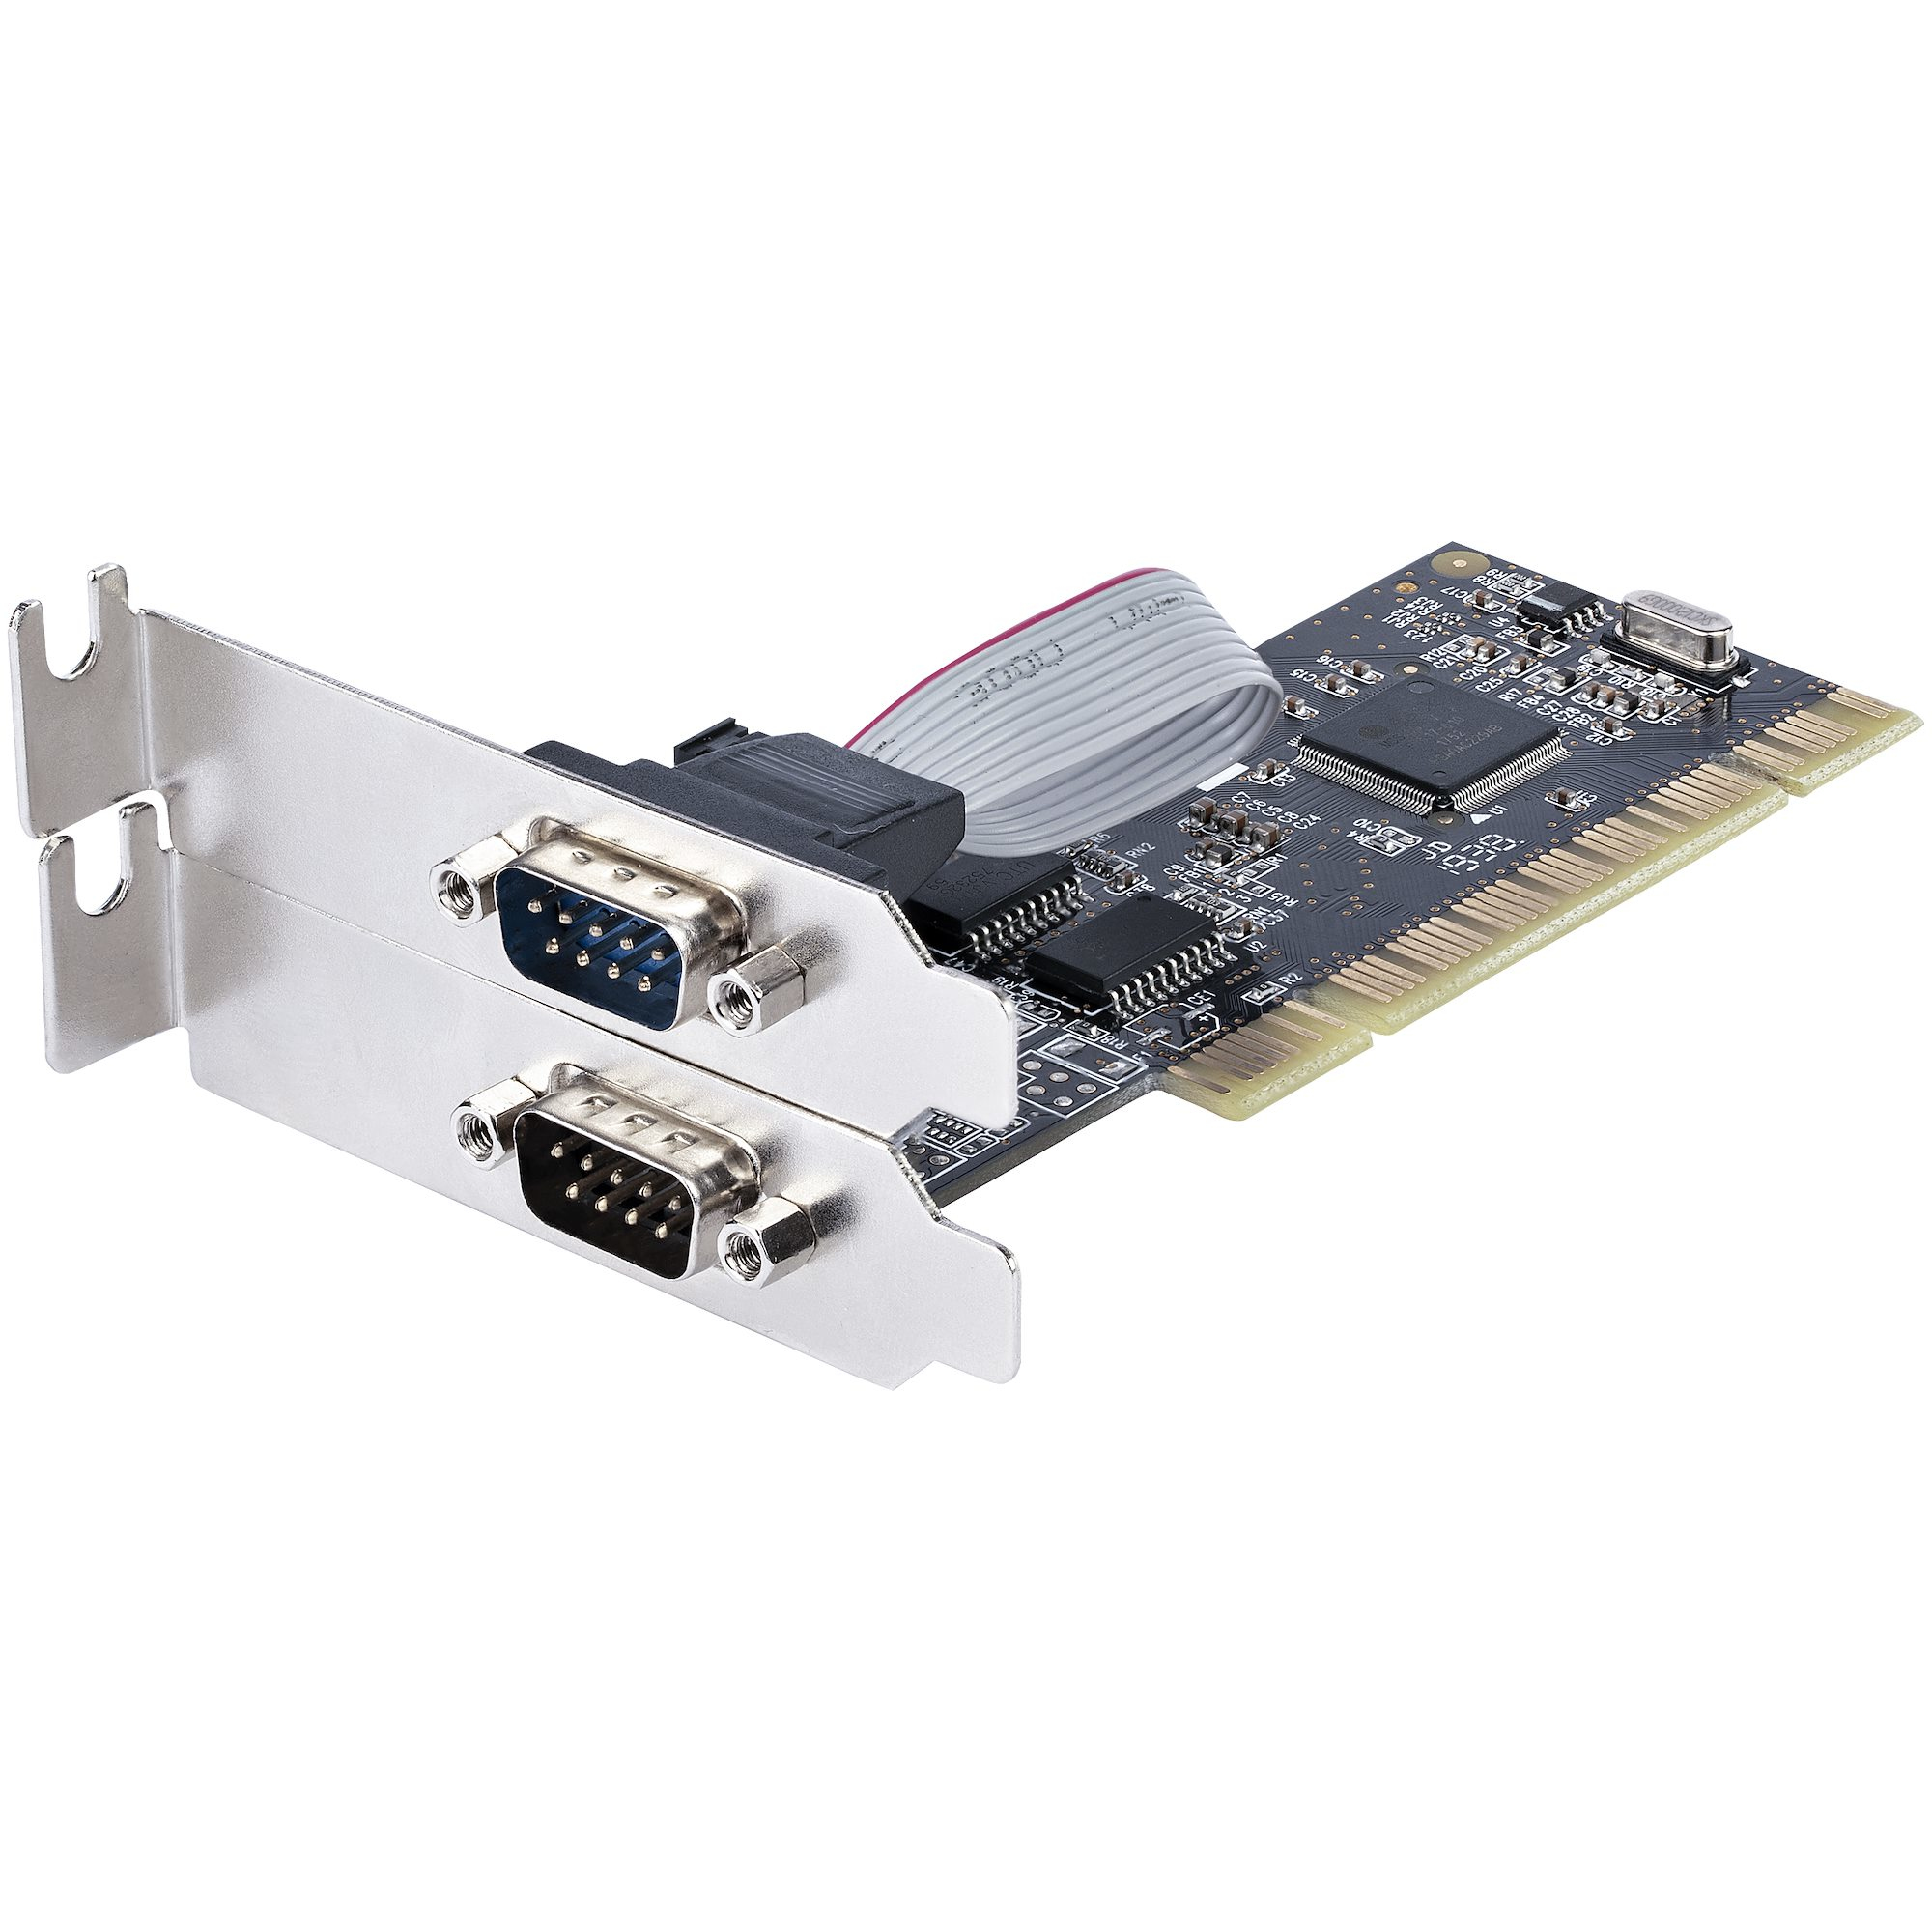 StarTech.com 2-Port PCI RS232 Serial Adapter Card - PCI Serial Port Expansion Controller Card - PCI to Dual Serial DB9 Card - Standard (Installed) & Low Profile Brackets - Windows/Linux